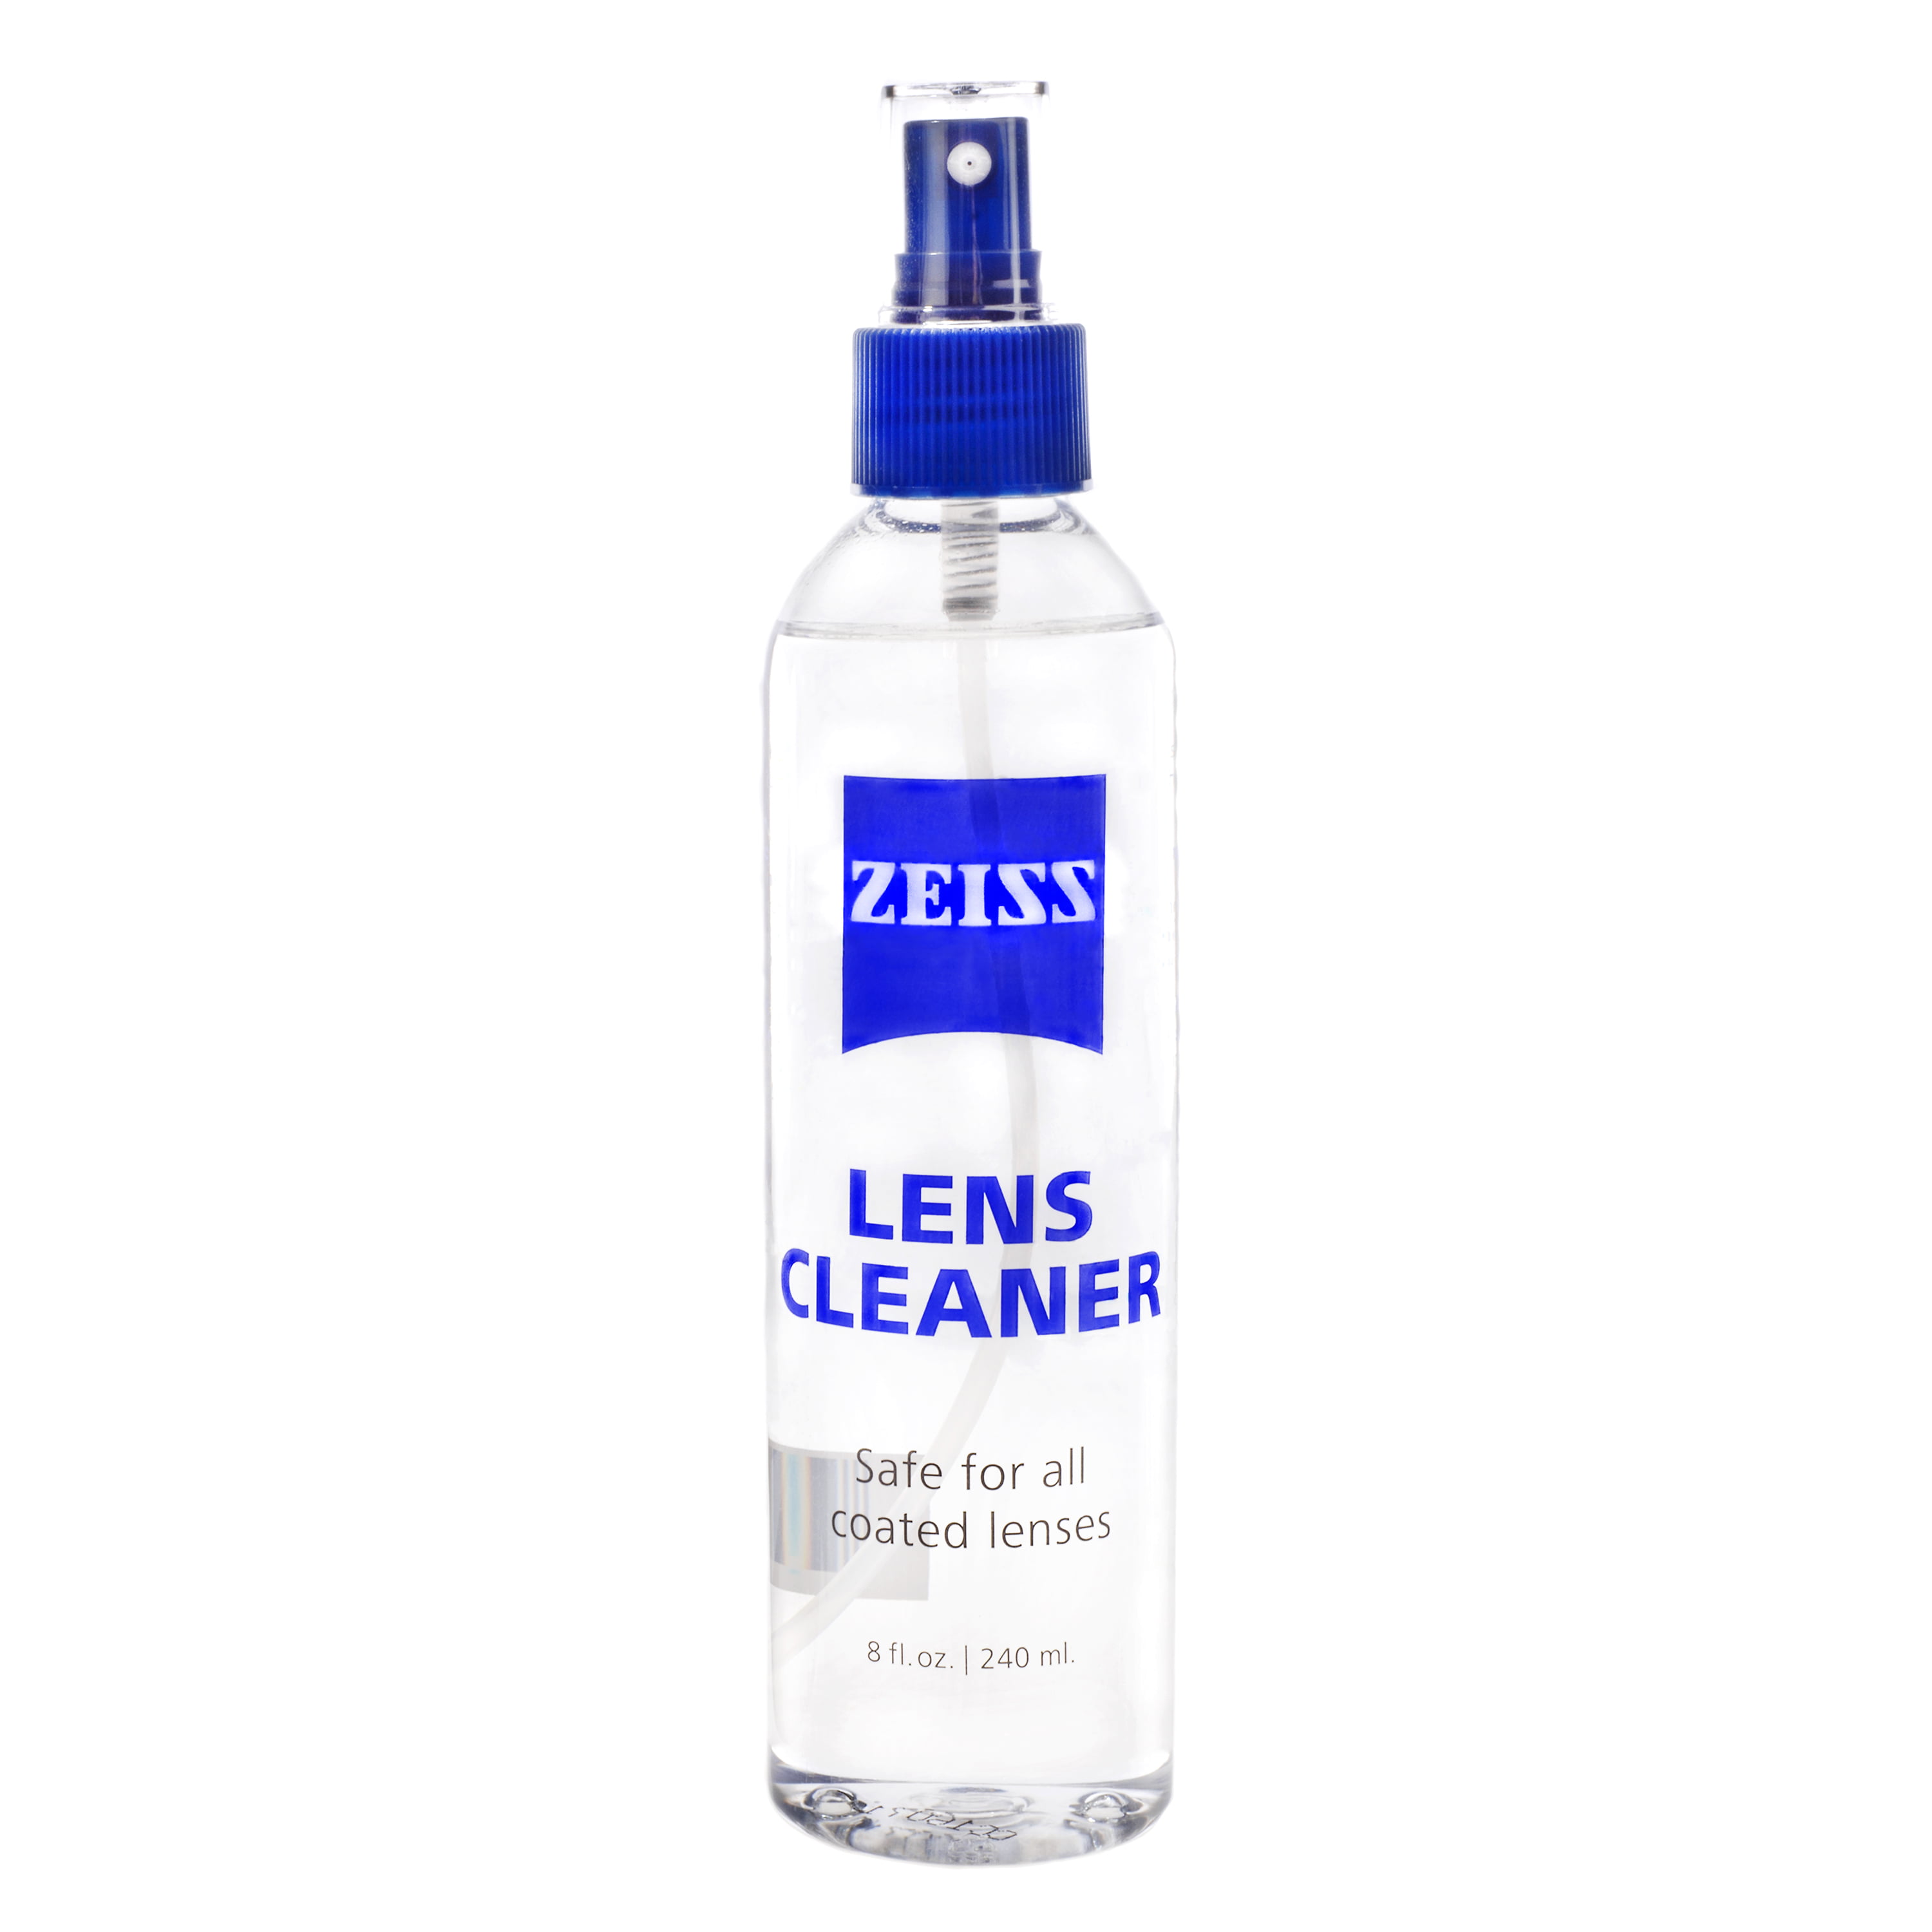 Zeiss Lens Cleaner Eye Glasses Cleaner Spray And Wipe Solution 8 Fl Oz